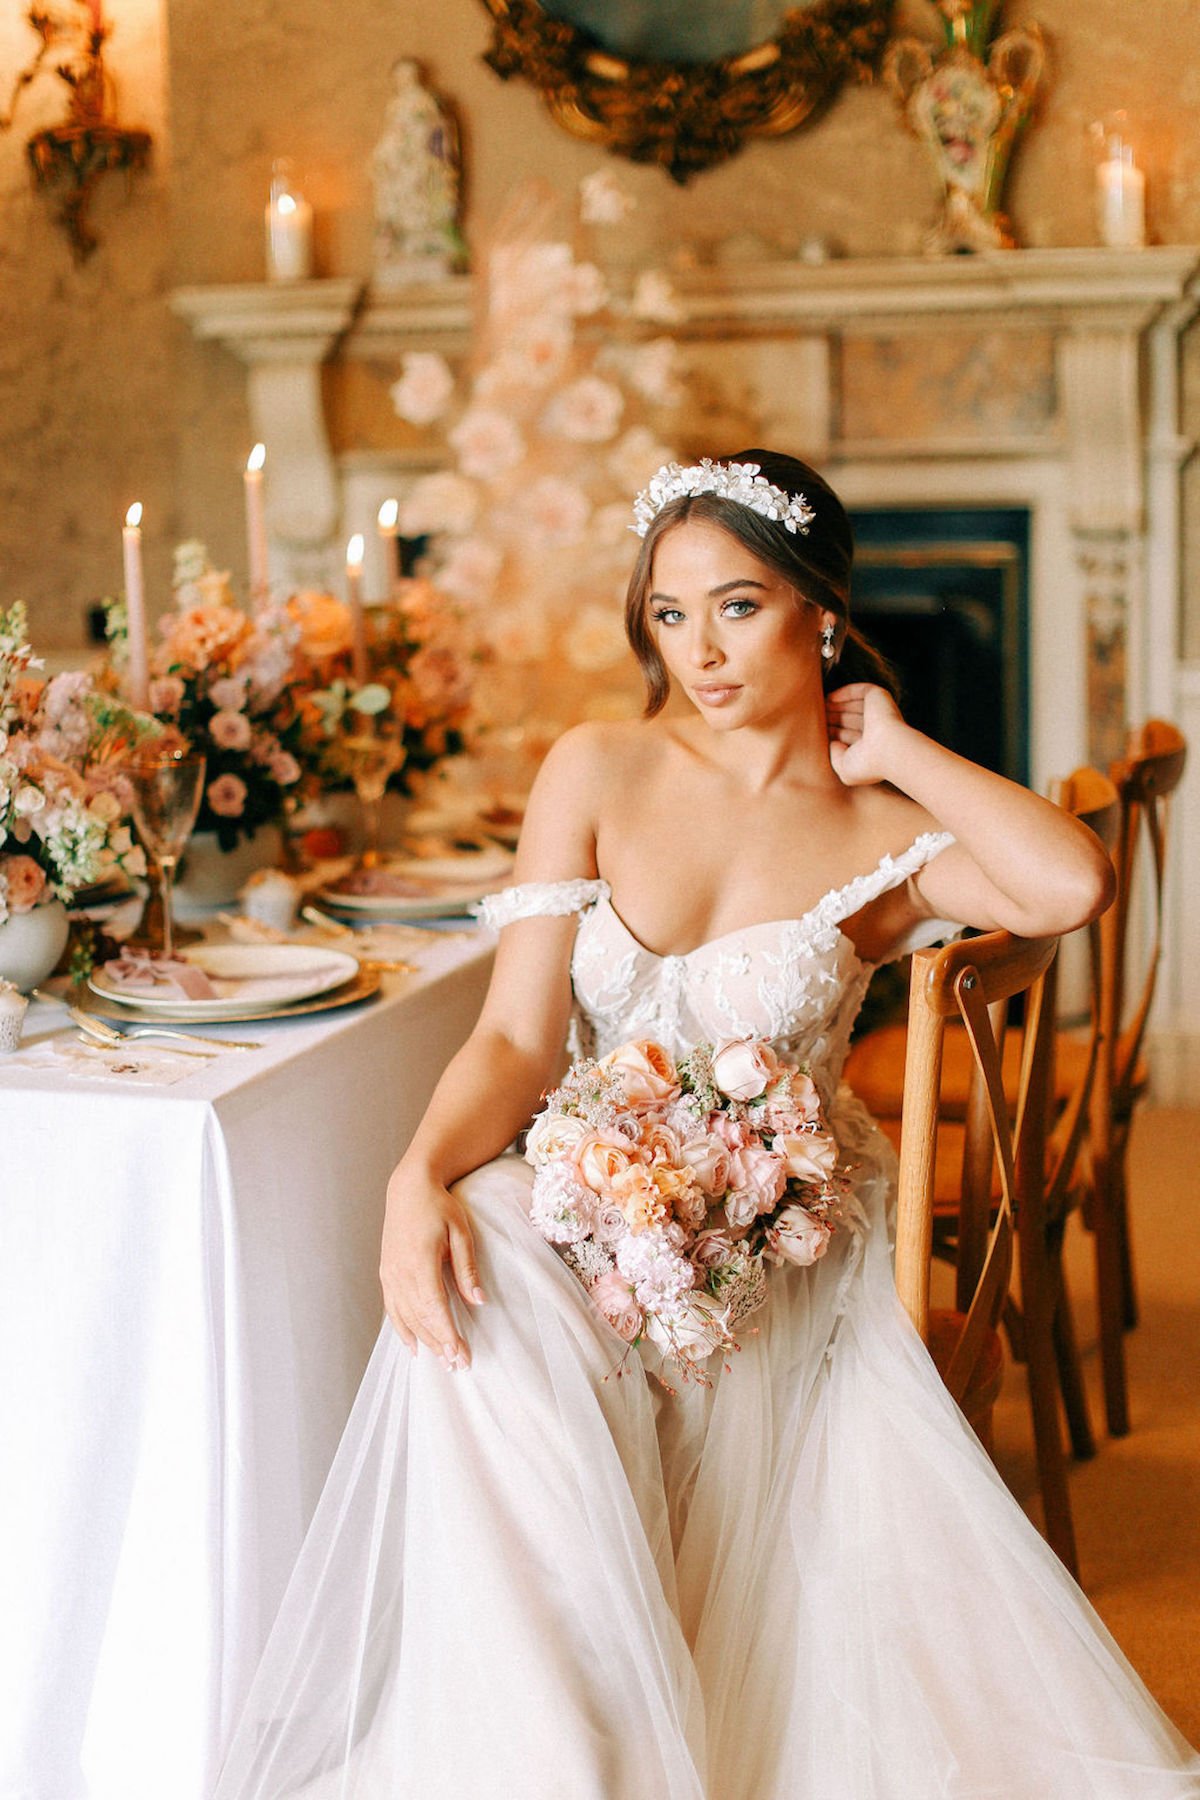 This Over-The-Top Styled Shoot Would Make Marie Antoinette Jealous